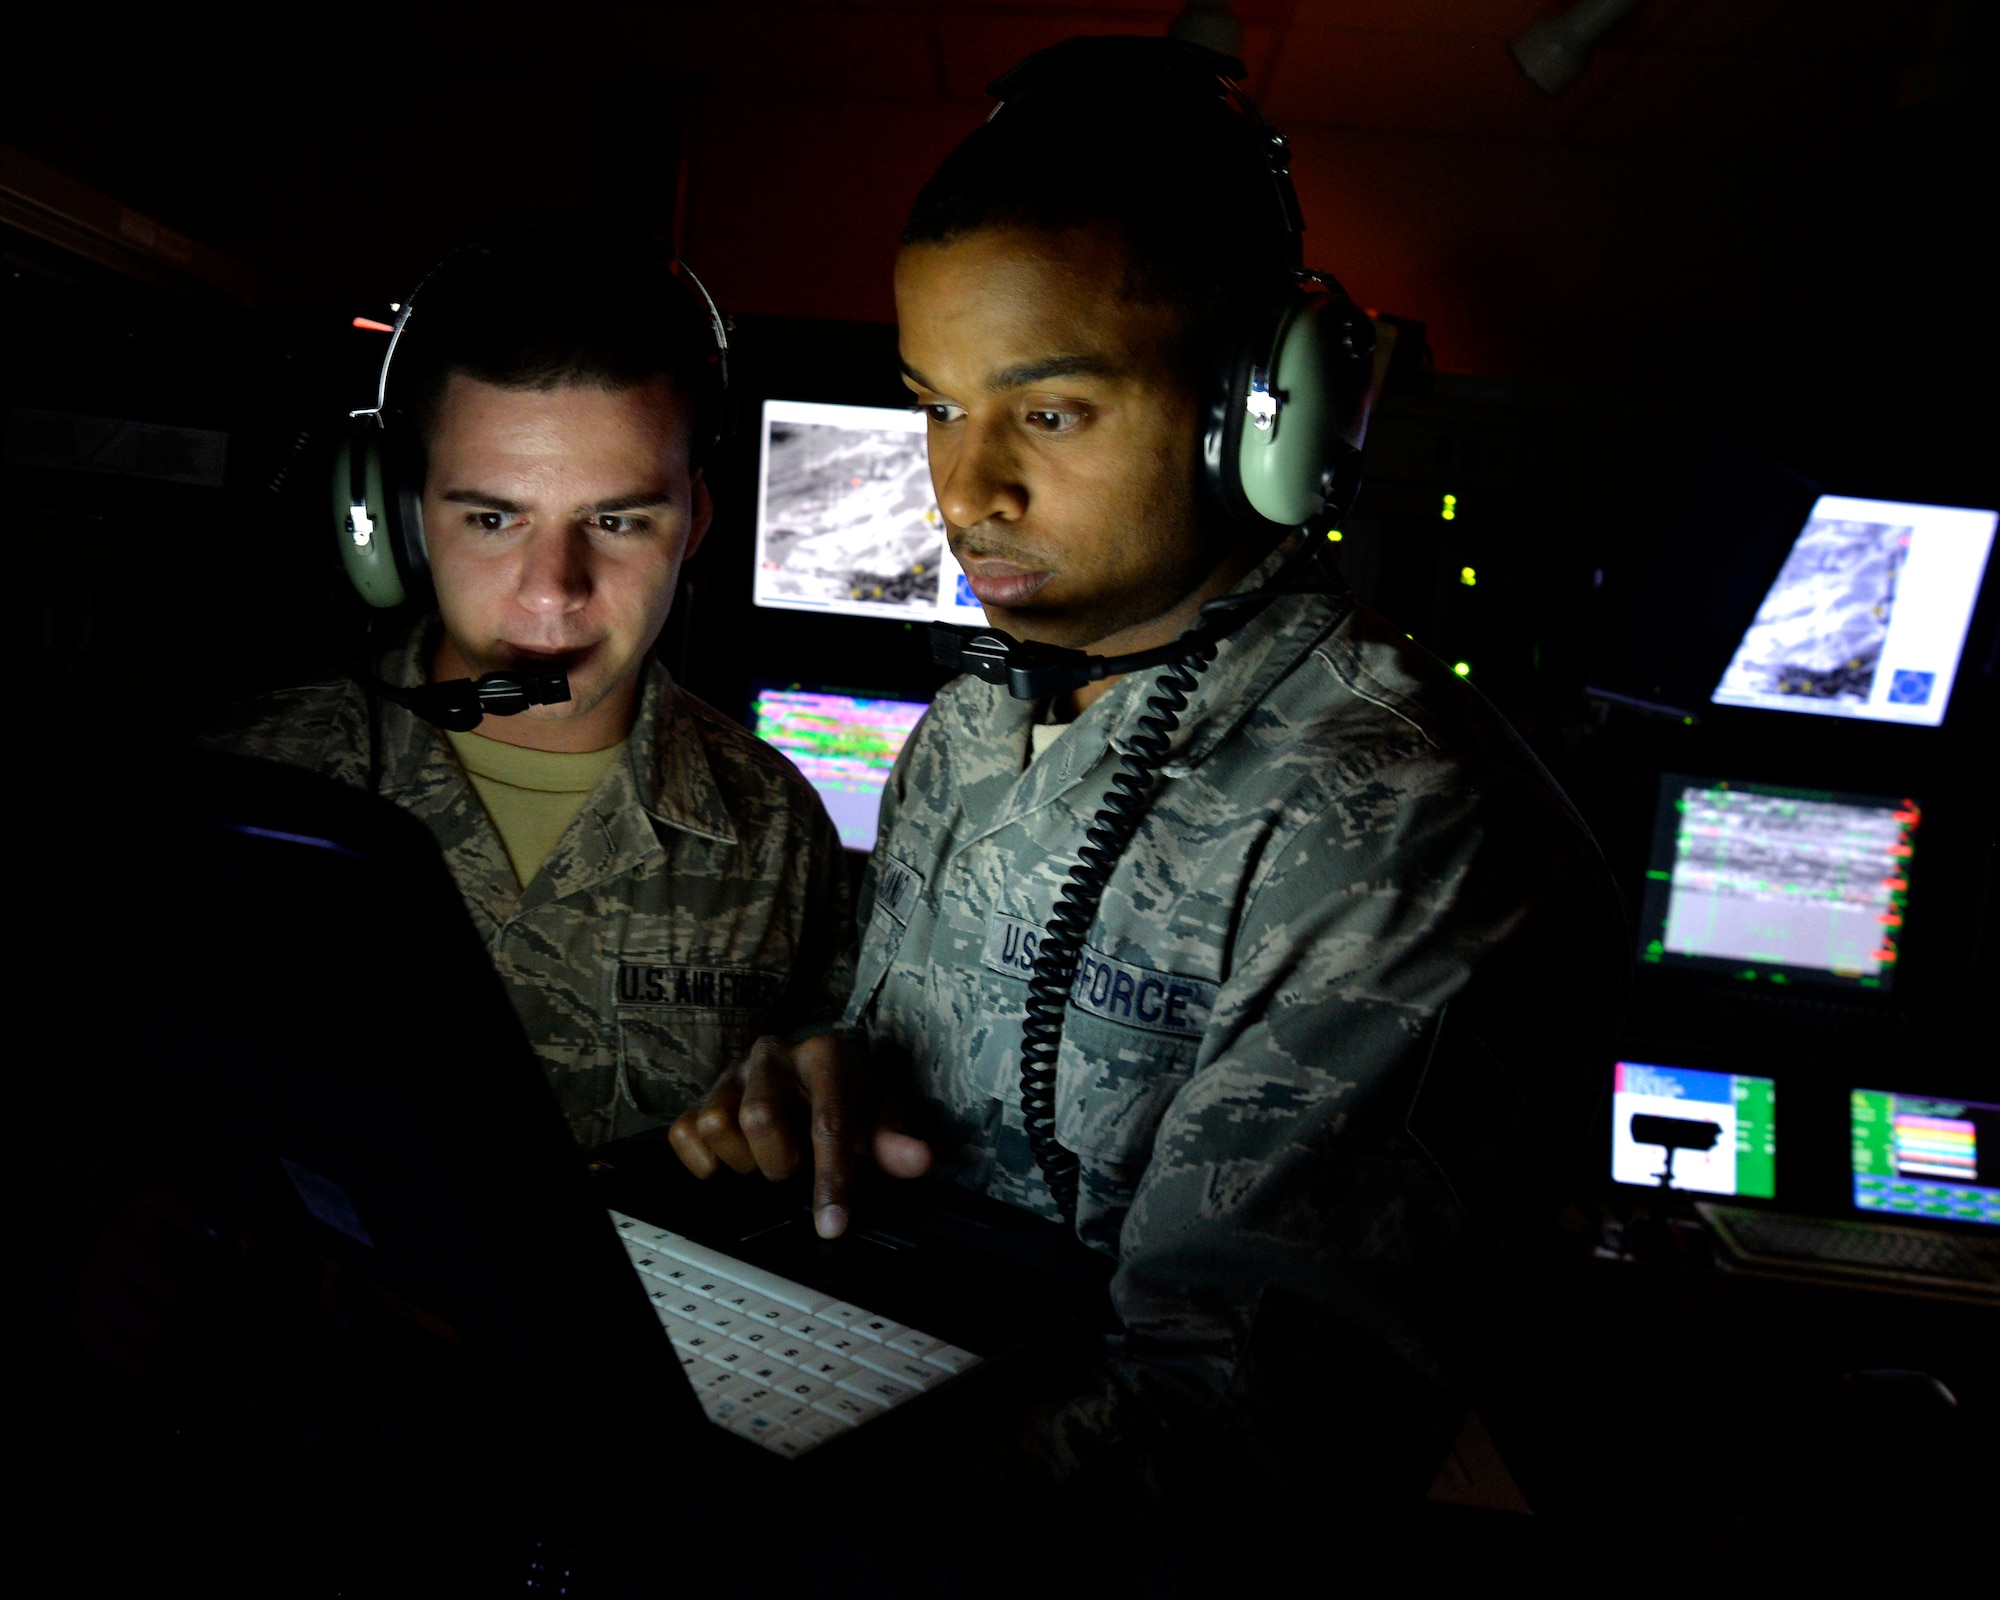 Airman First Class Ryder Luzadder, 432nd Aircraft Communications Maintenance Squadron communications technician, left, and Staff Sgt. Jose Feliciano, 432nd ACMS communications technician, look over technical orders for a ground control station May 28, 2014. The 432nd ACMS is the only squadron of its kind in the Air Force and is responsible for providing 24/7, 365-day maintenance support to the communication infrastructure that supports the wing's global remotely piloted aircraft operations. (U.S. Air Force photo by Staff Sgt. Adawn Kelsey/Released)